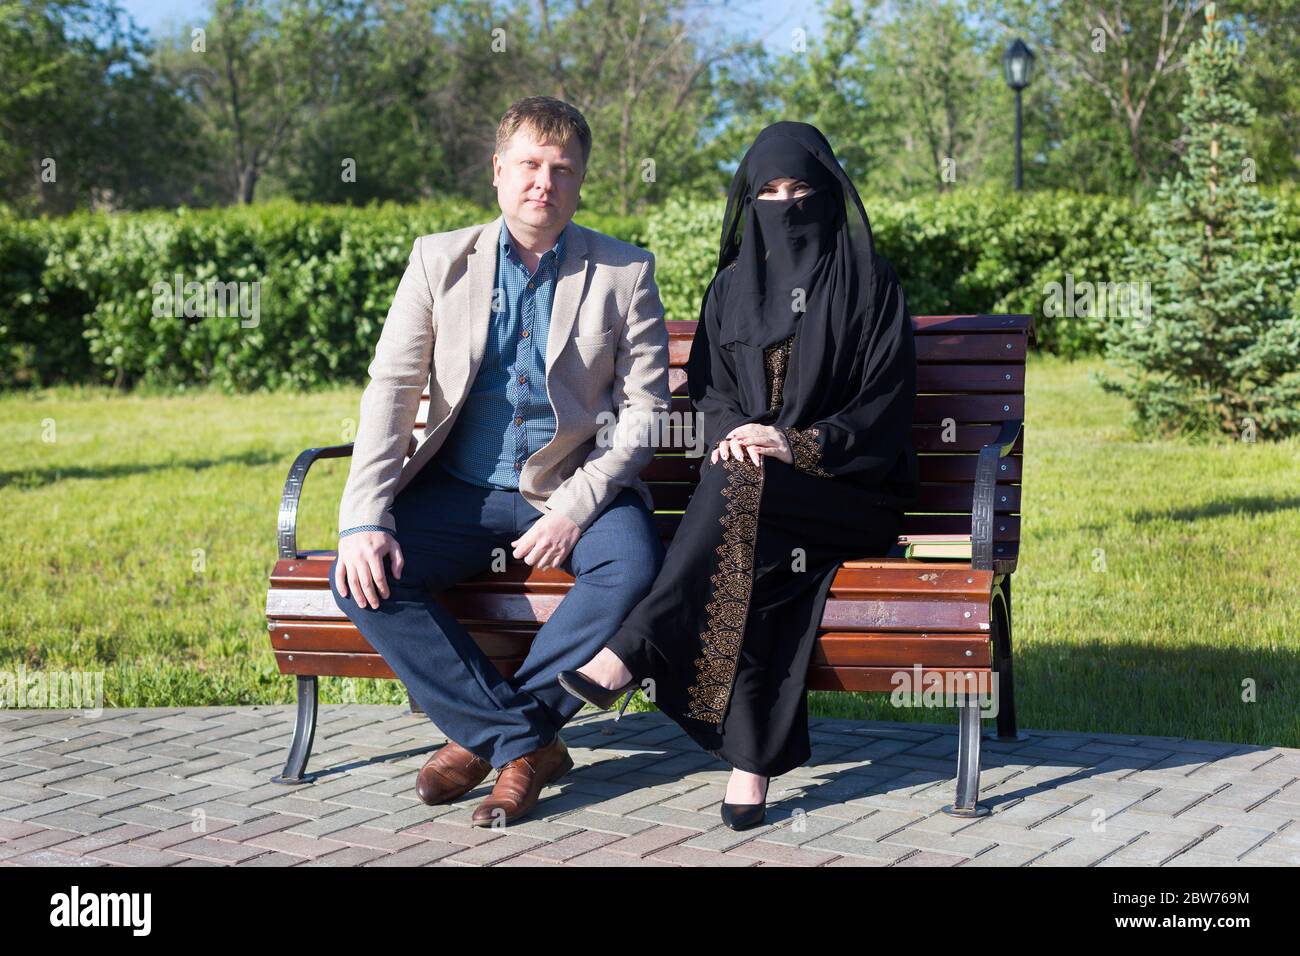 The friendship of a European man and a Muslim woman. Stock Photo